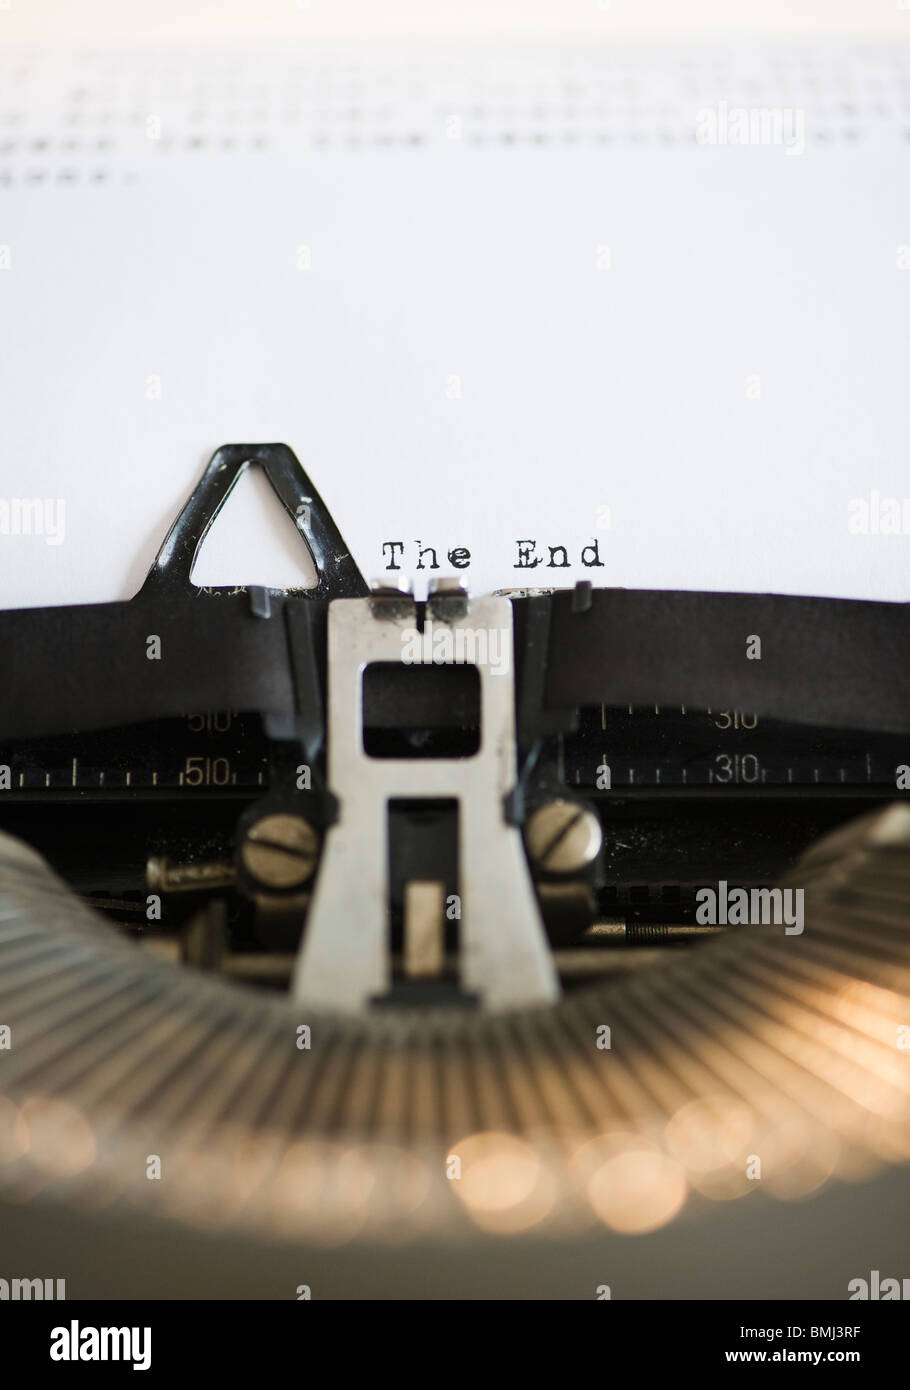 Typewriter and the end of the story Stock Photo